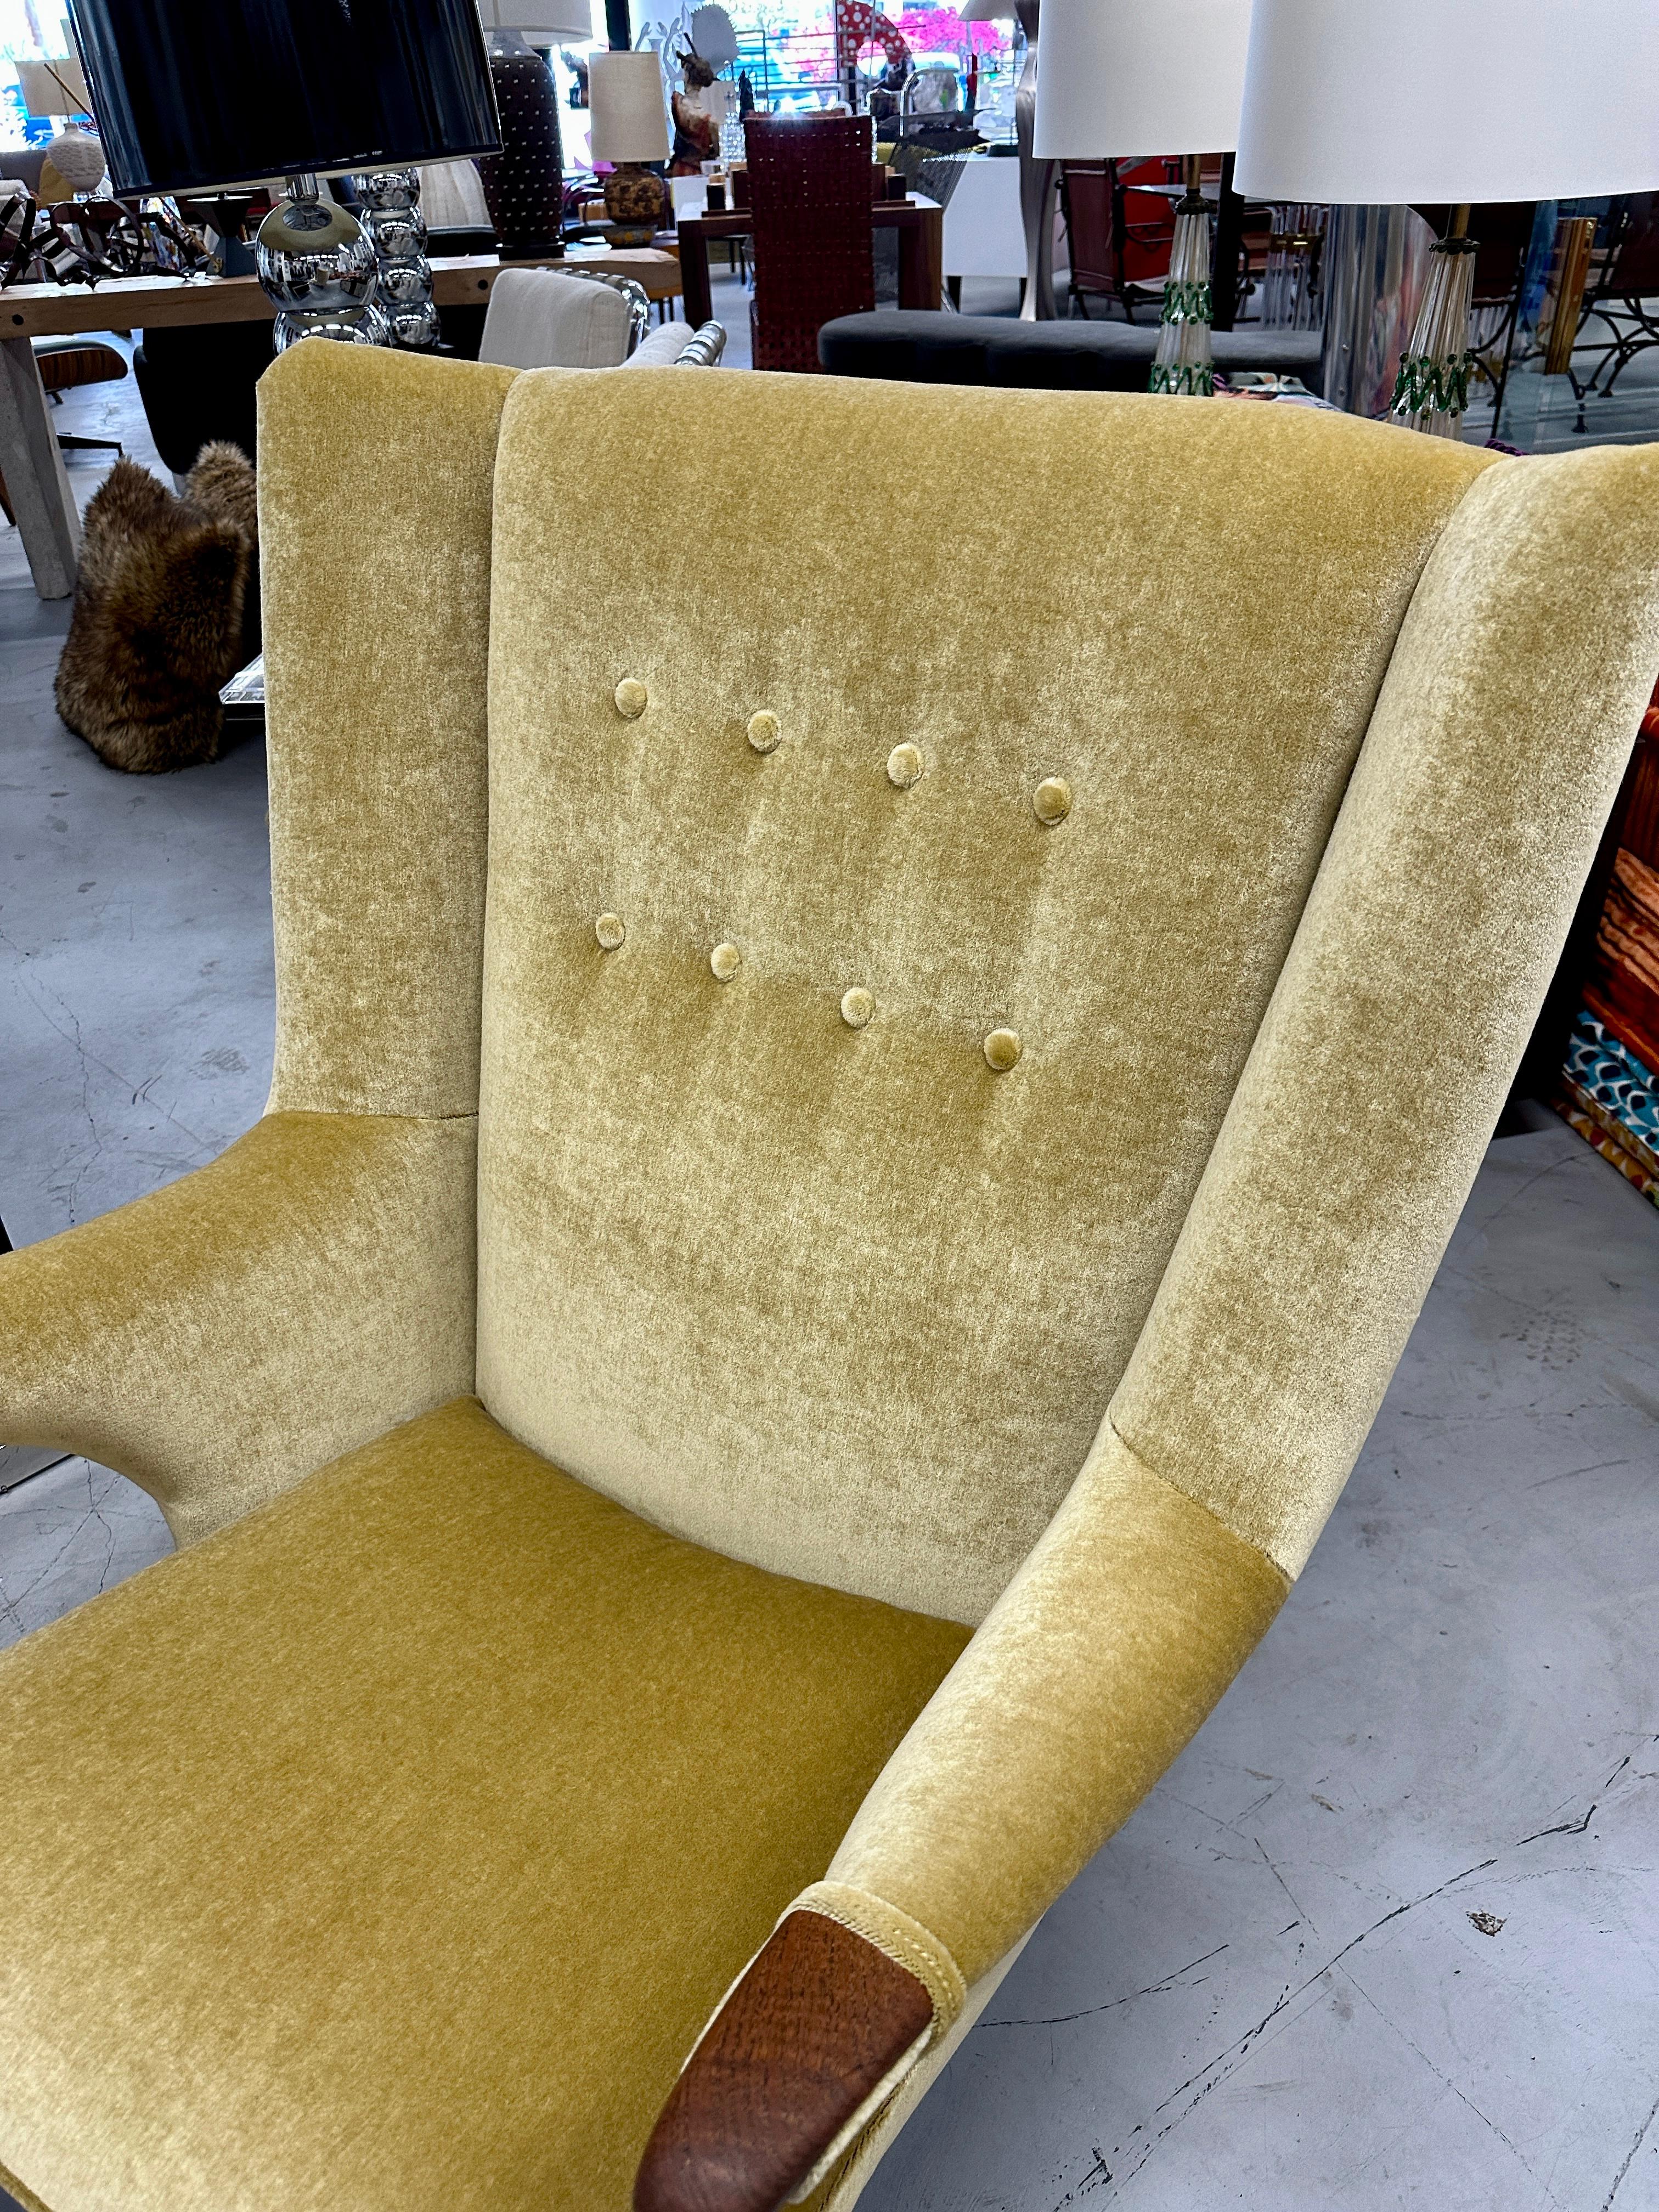 A stunning lounge chair and ottoman designed by Bent Moller Jepsen in the late 1950s and produced by Simo of Denmark. A rare early version this has been beautifully reupholstered in a 100% Wool mohair. The teak accents and legs are in good